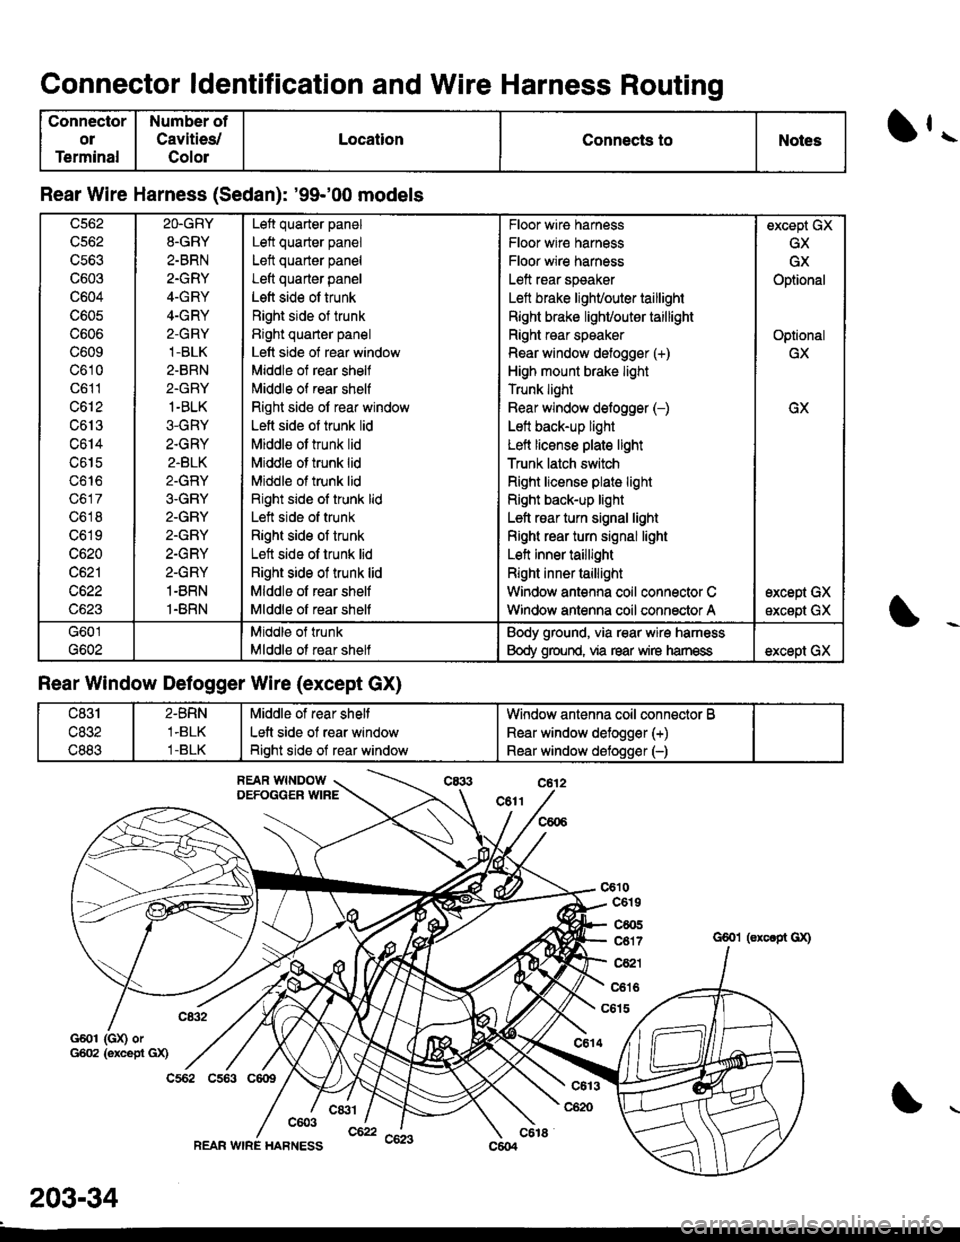 HONDA CIVIC 1996 6.G Manual PDF Connector ldentification and Wire Harness Routinq
Connector
ol
Terminal
Number of
Cavities/
Color
LocationConnects toNotesll..
Rear Wire Harness (Sedan): 99-00 models
G601 (GX) orG602 (excepi GX)
c6